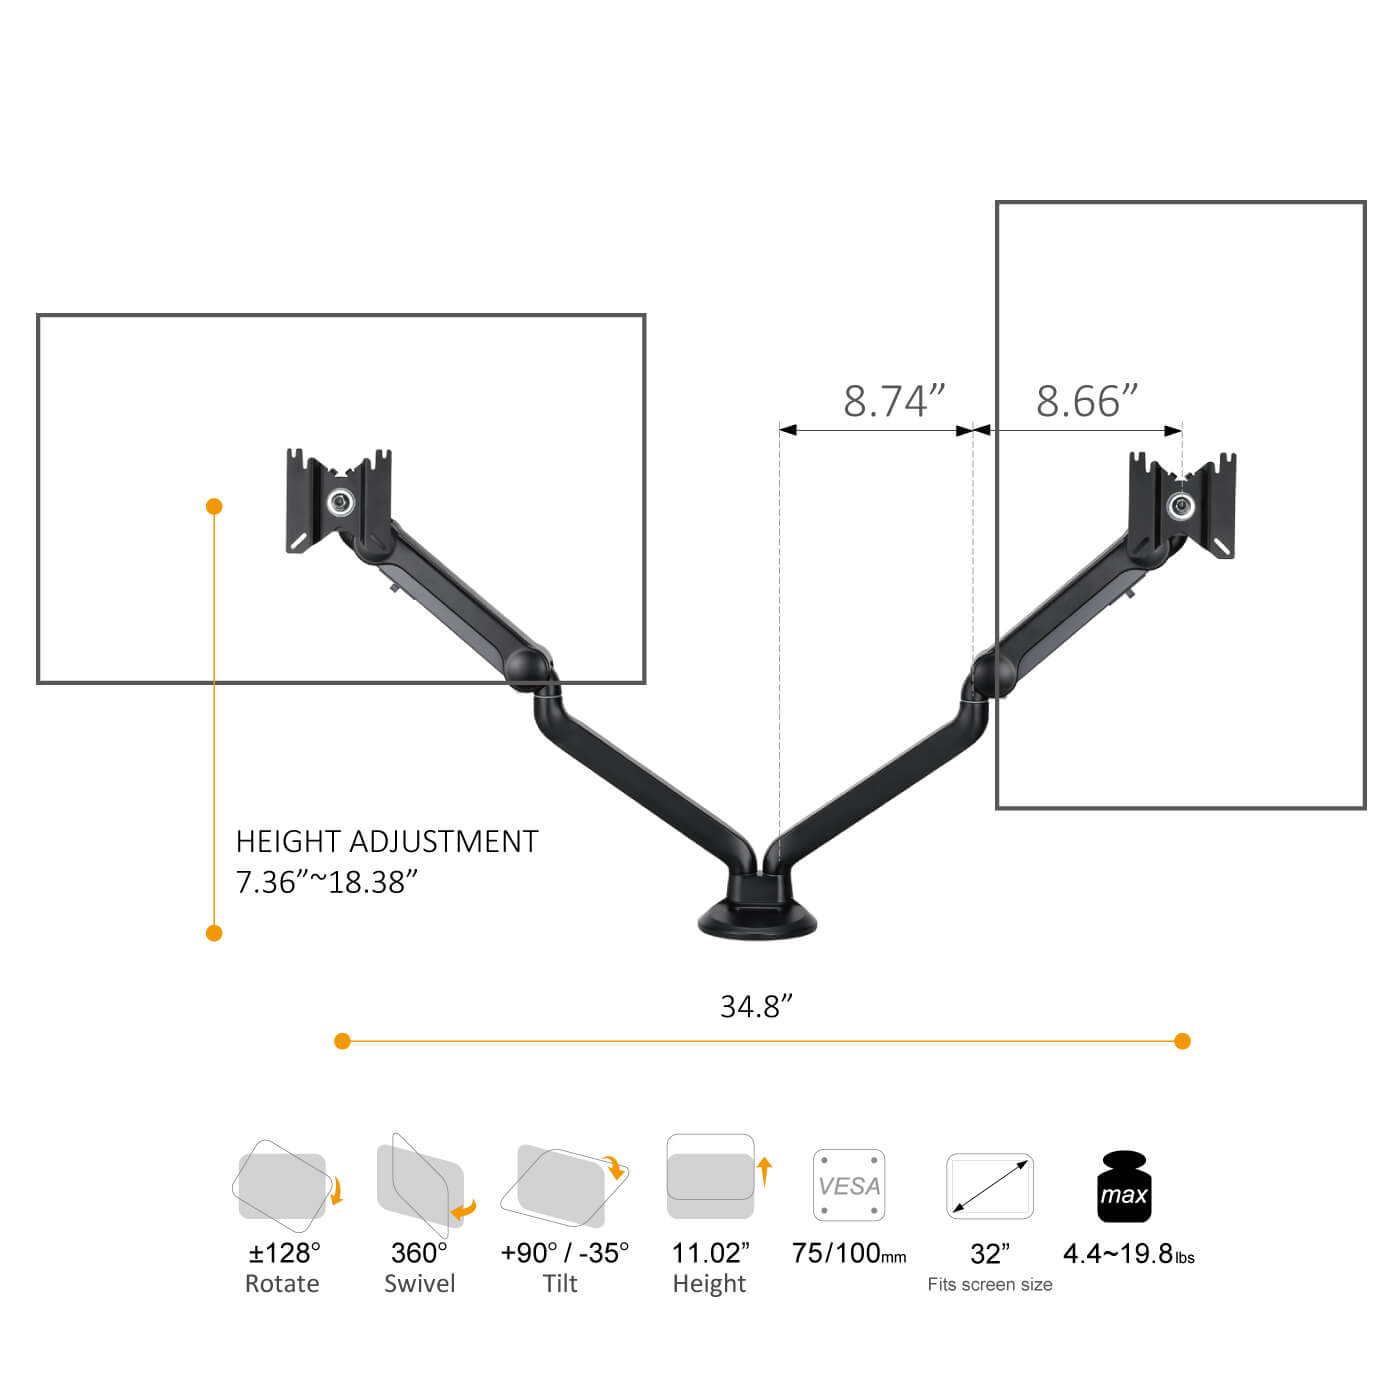 Specifications of Modernsolid 1802 Dual Monitor Gas Spring Mount